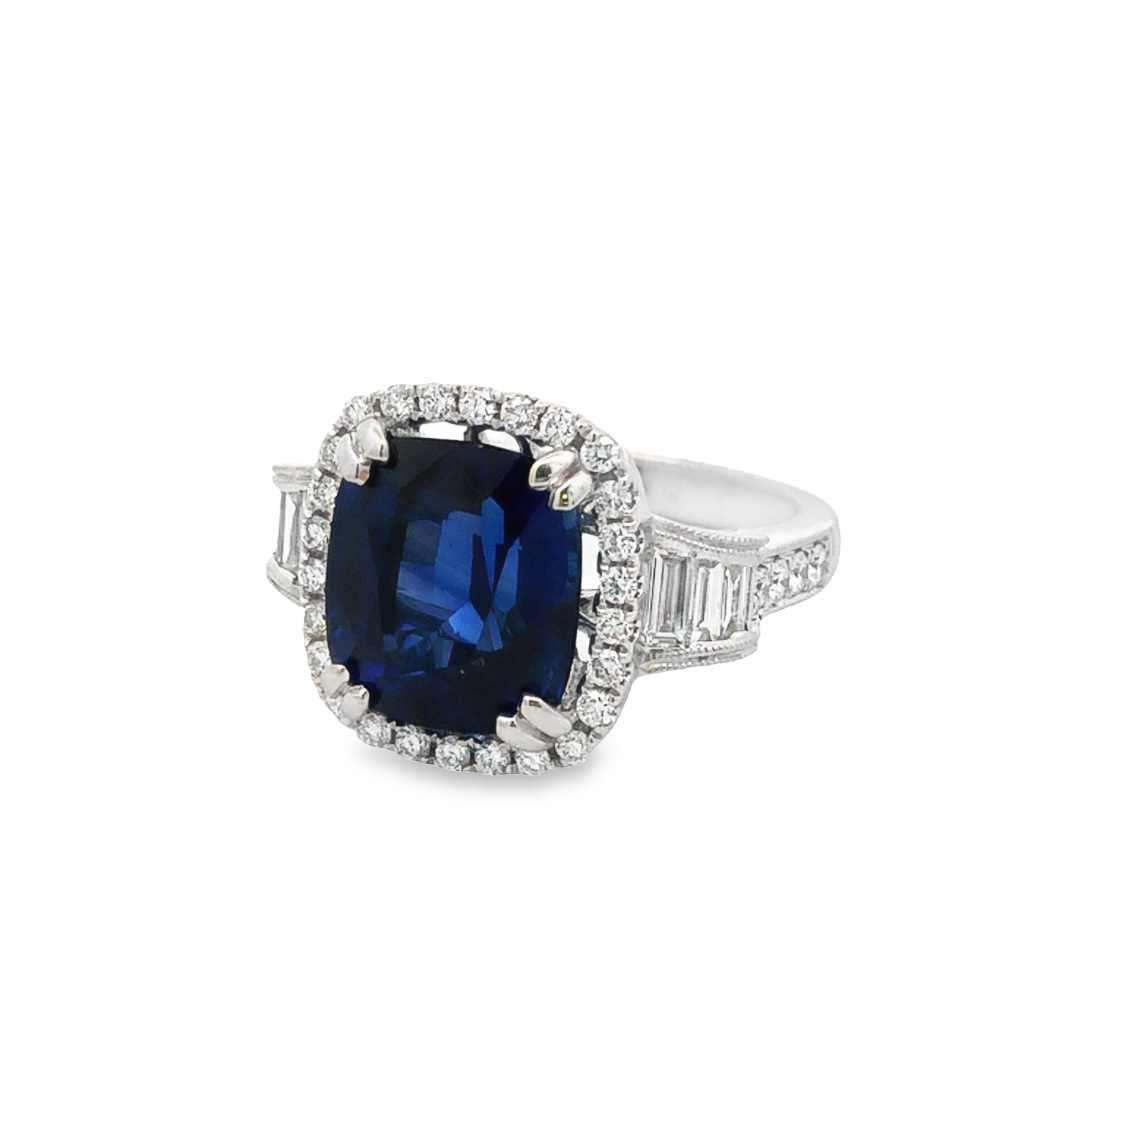 18K White Gold Sapphire and Diamond Ring with 1 Cushion Cut Sapphire from Madagascar